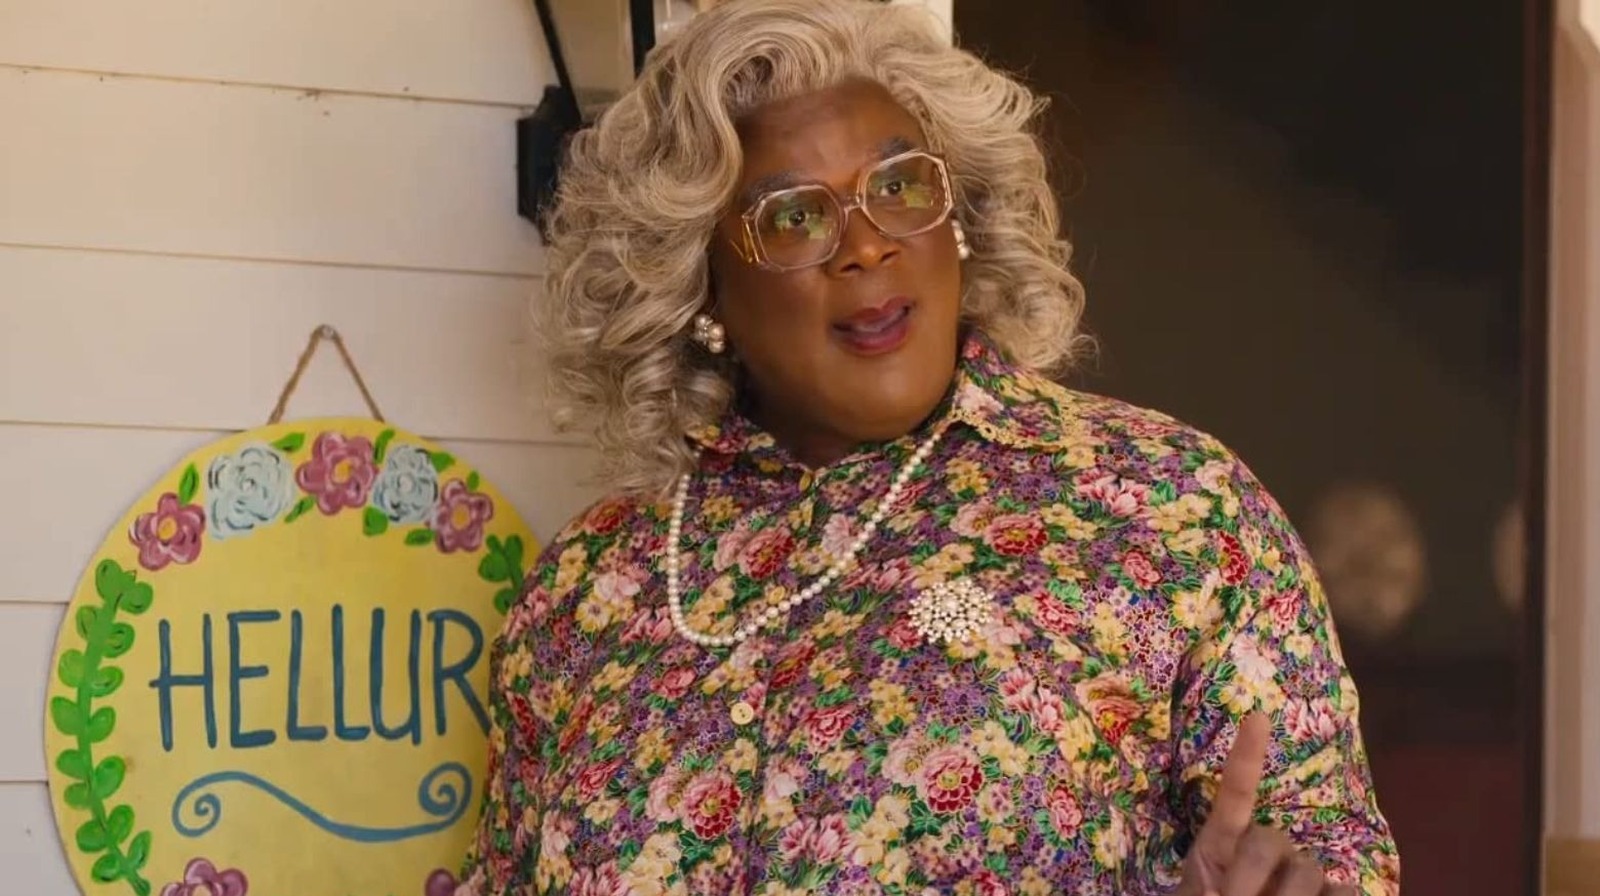 Mea Culpa Everything We Know About Tyler Perry's Latest Netflix Movie